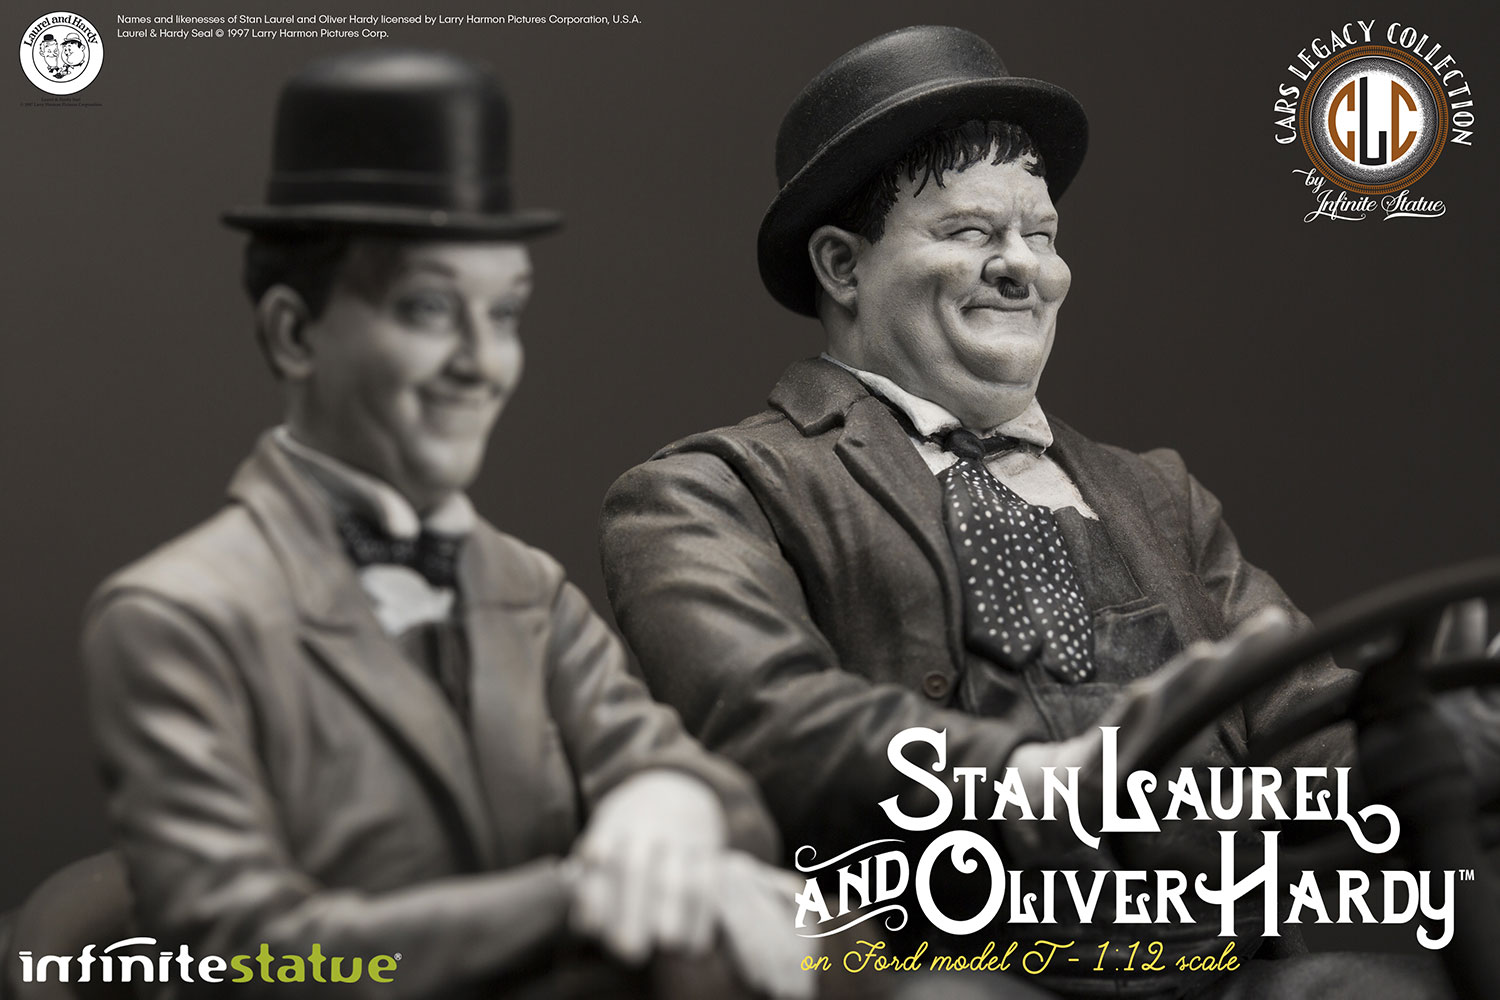 Laurel & Hardy on Ford Model T- Prototype Shown